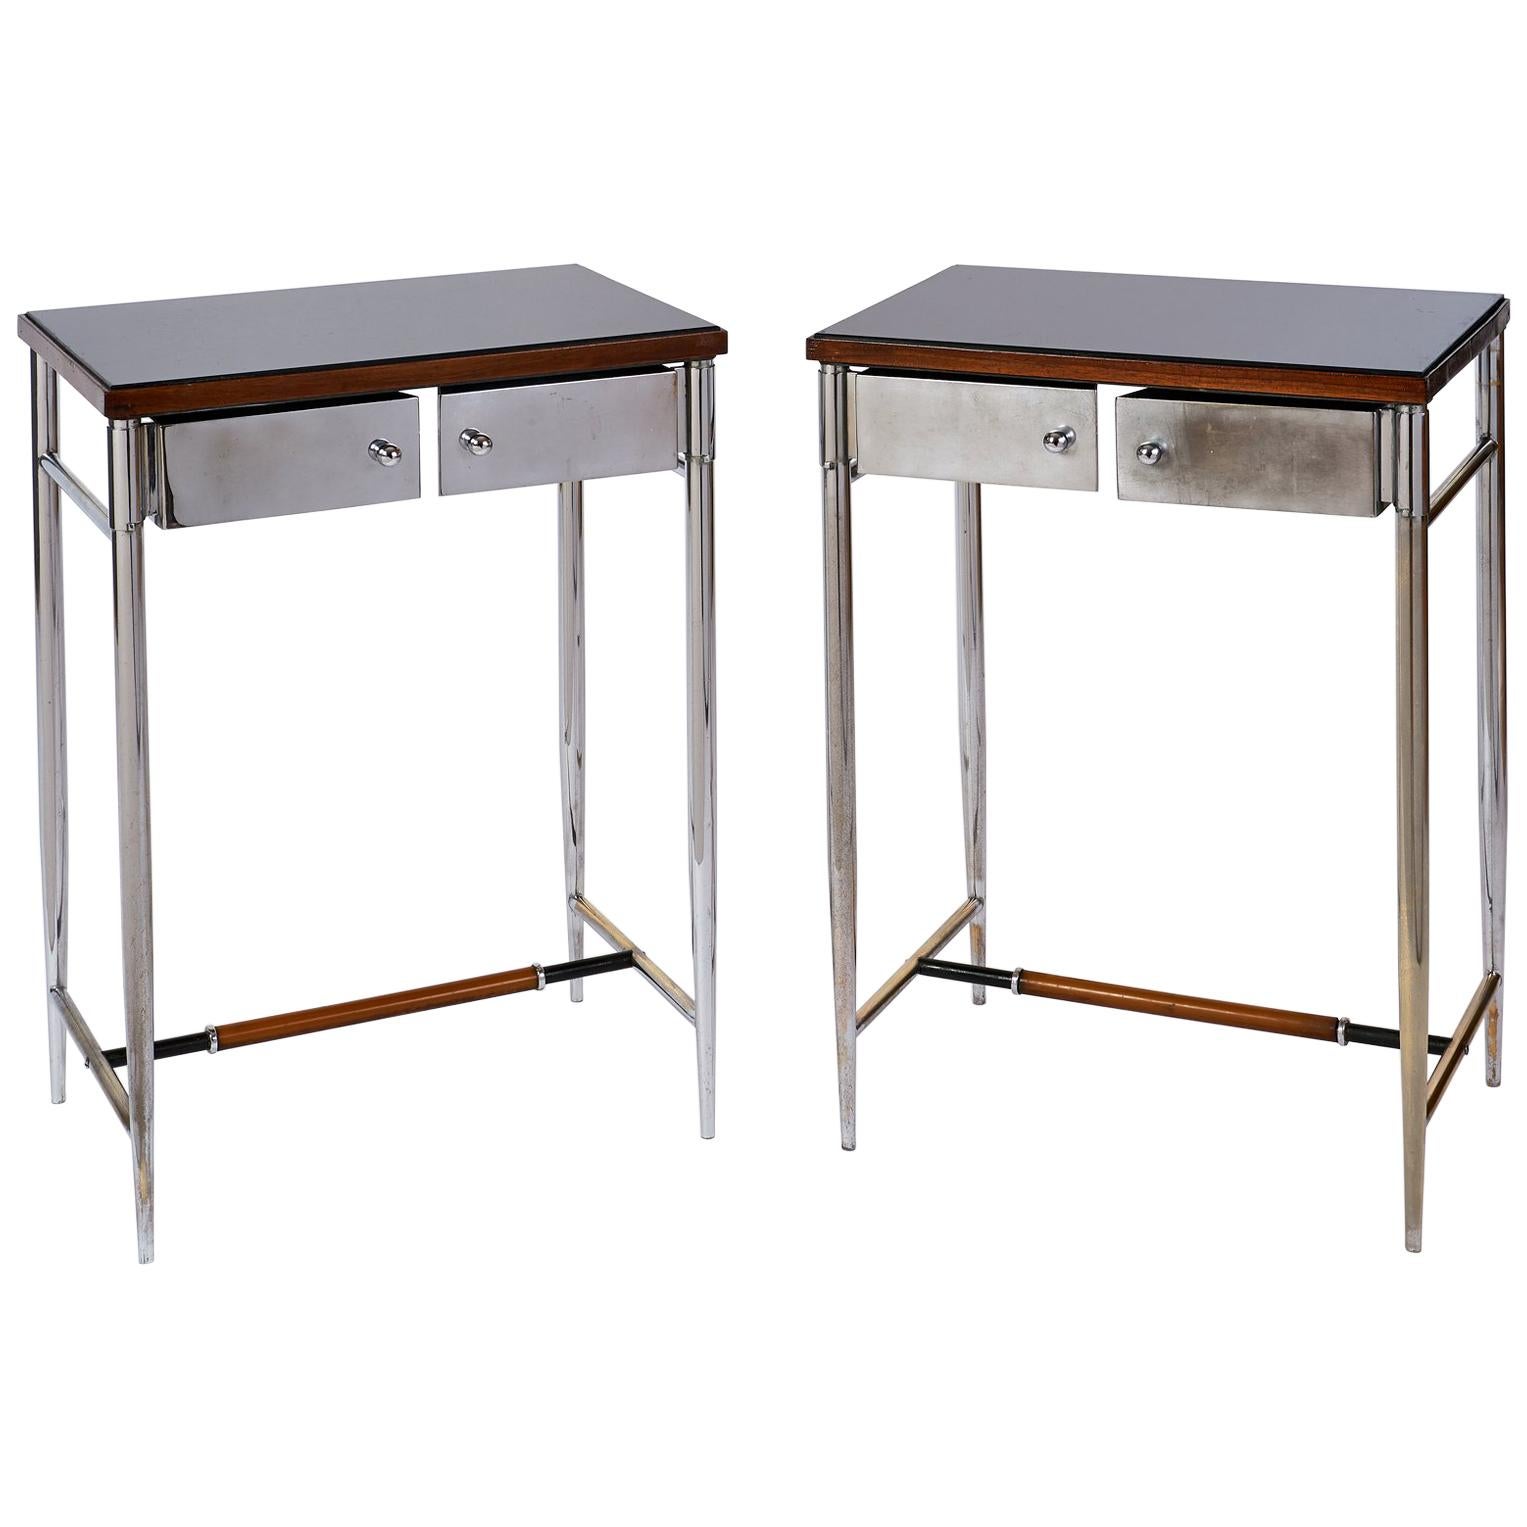 Pair of Graceful Chromed Side Tables, Italy, 1930s